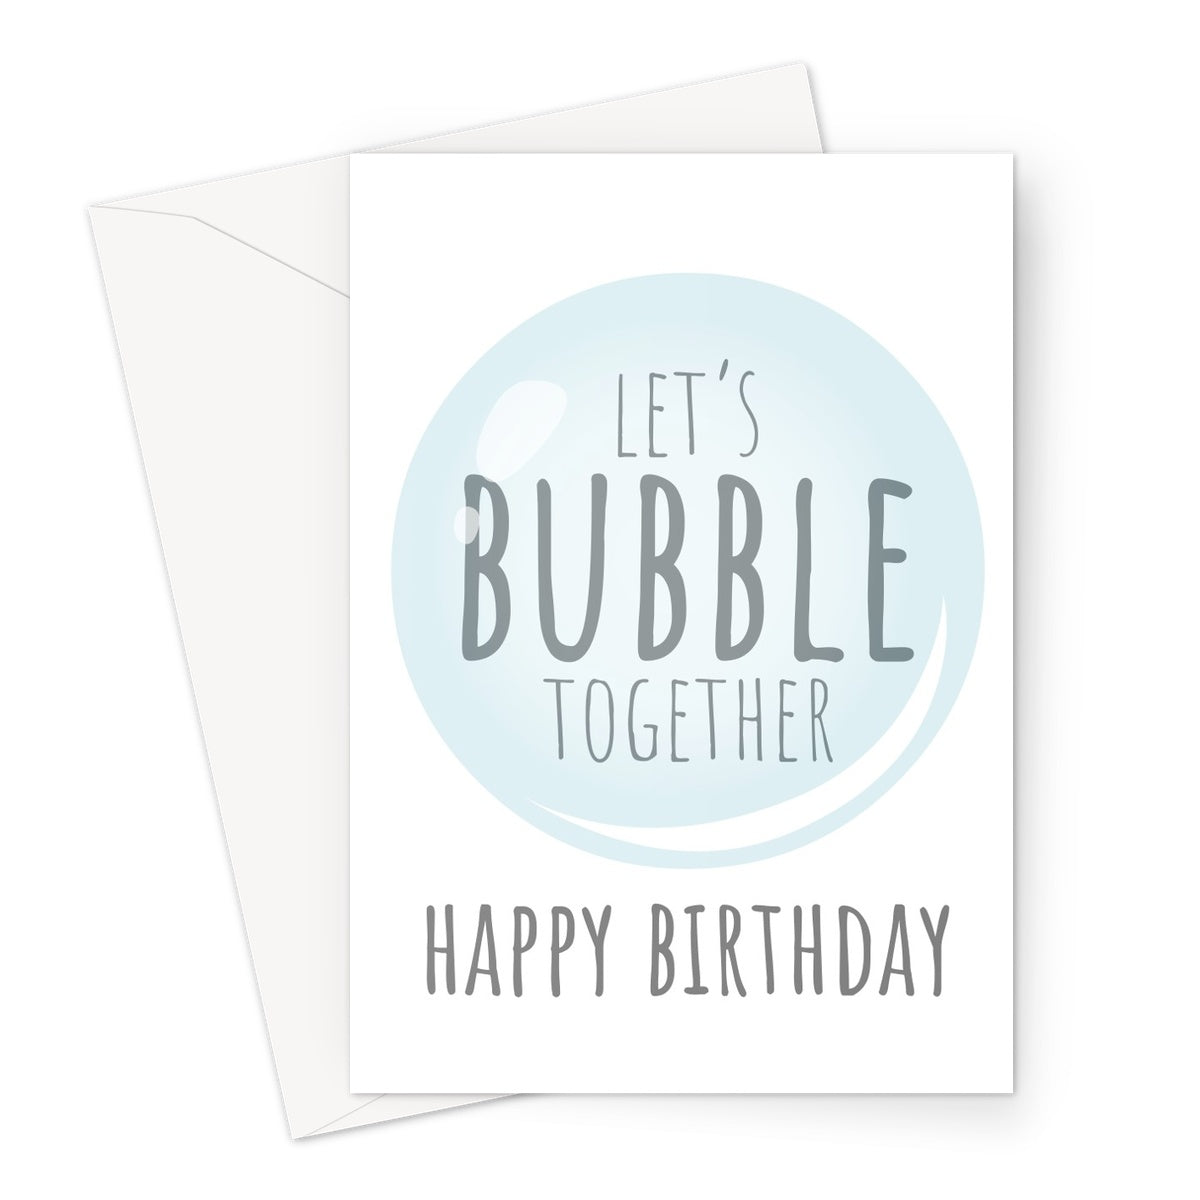 Let's Bubble Together CUSTOM happy birthday Greeting Card